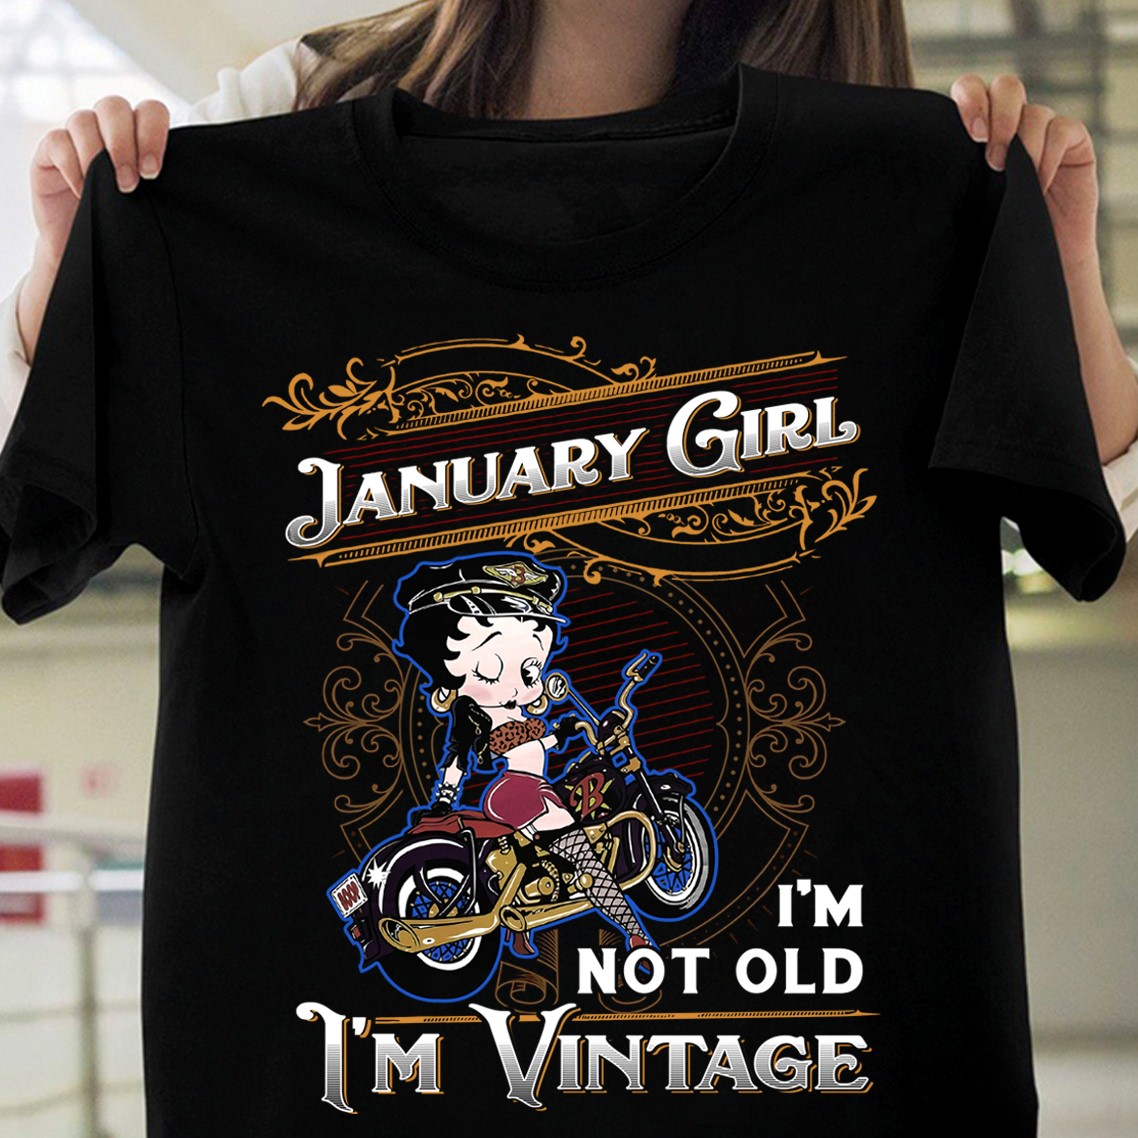 January girl I'm not old I'm vintage - Girl love motorcycle